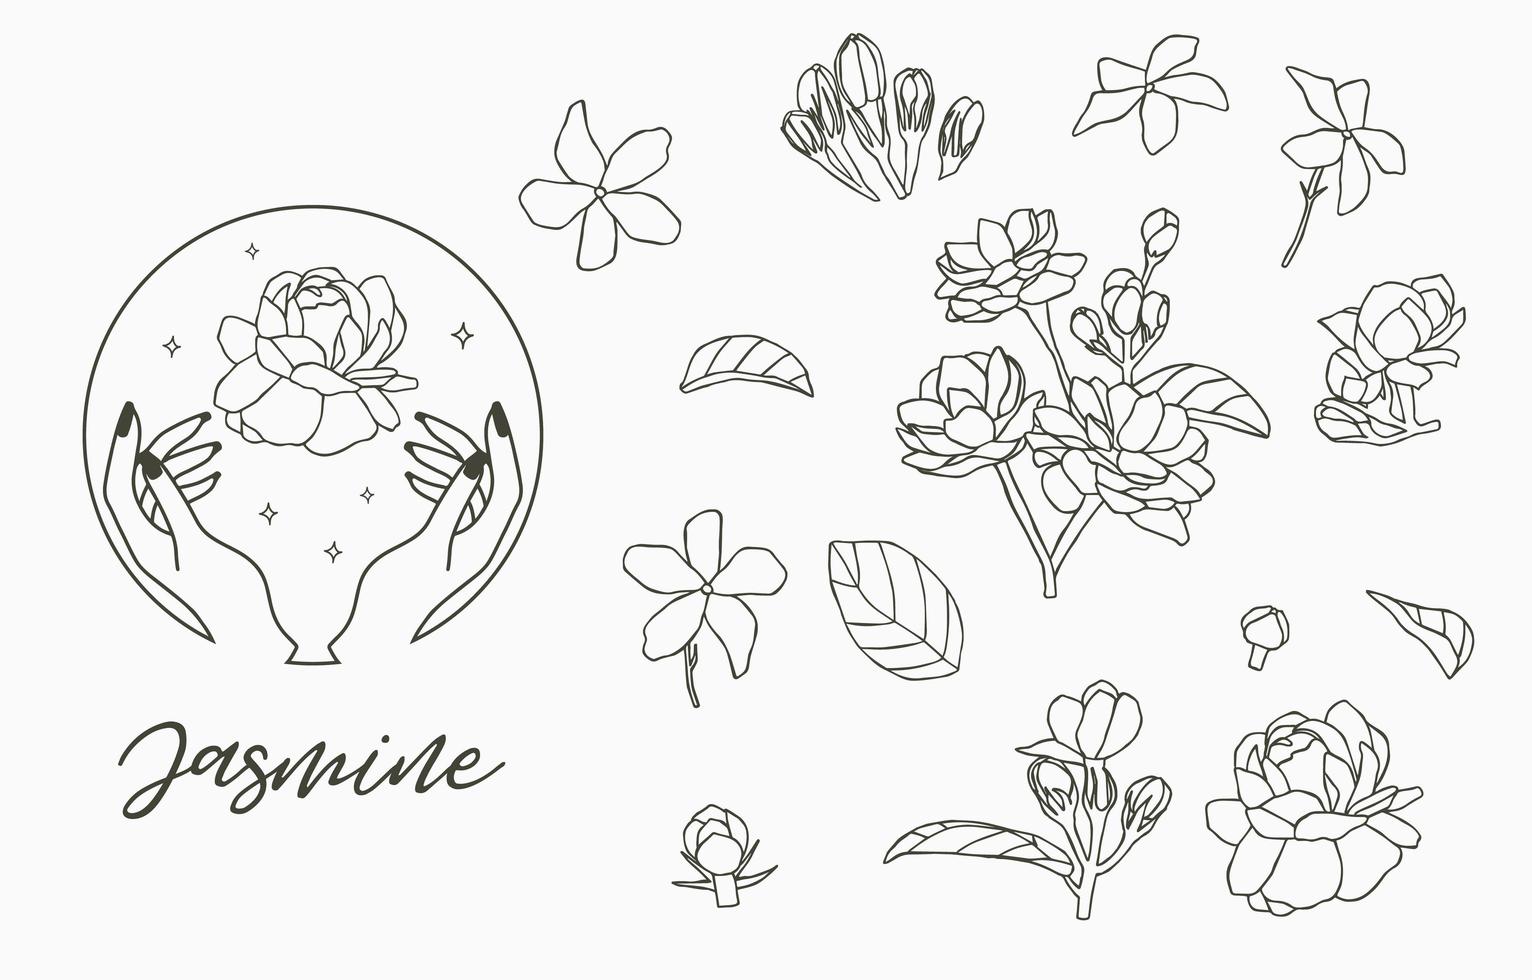 Jasmine collection with leaves vector